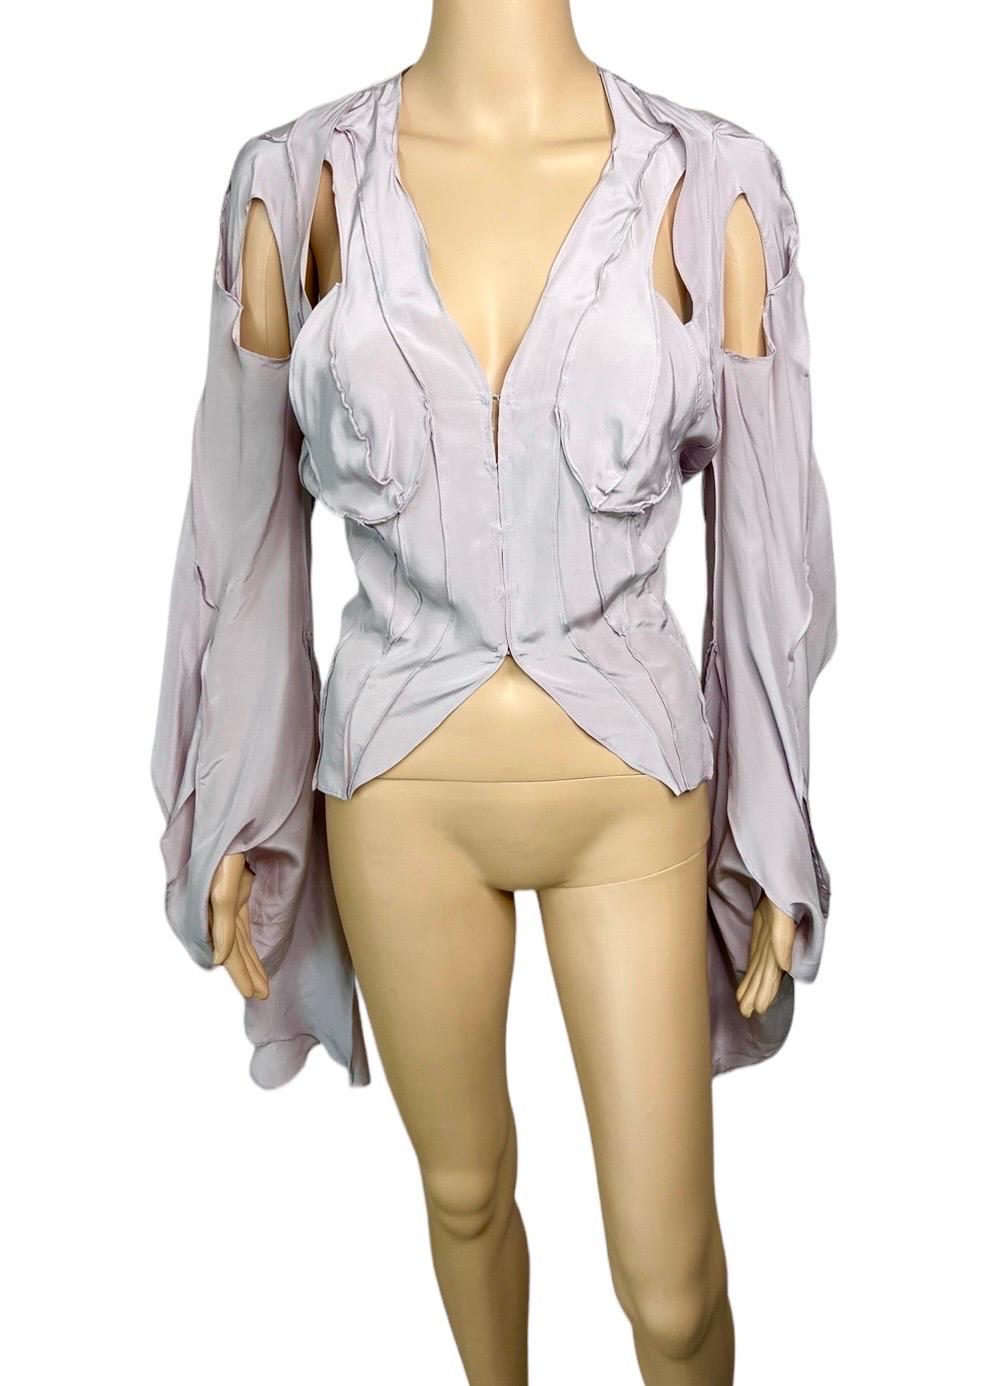 Tom Ford for Yves Saint Laurent YSL S/S 2003 Runway Cutout Shirt Blouse Top FR 38

Look 9 from the Spring 2003 Collection.
